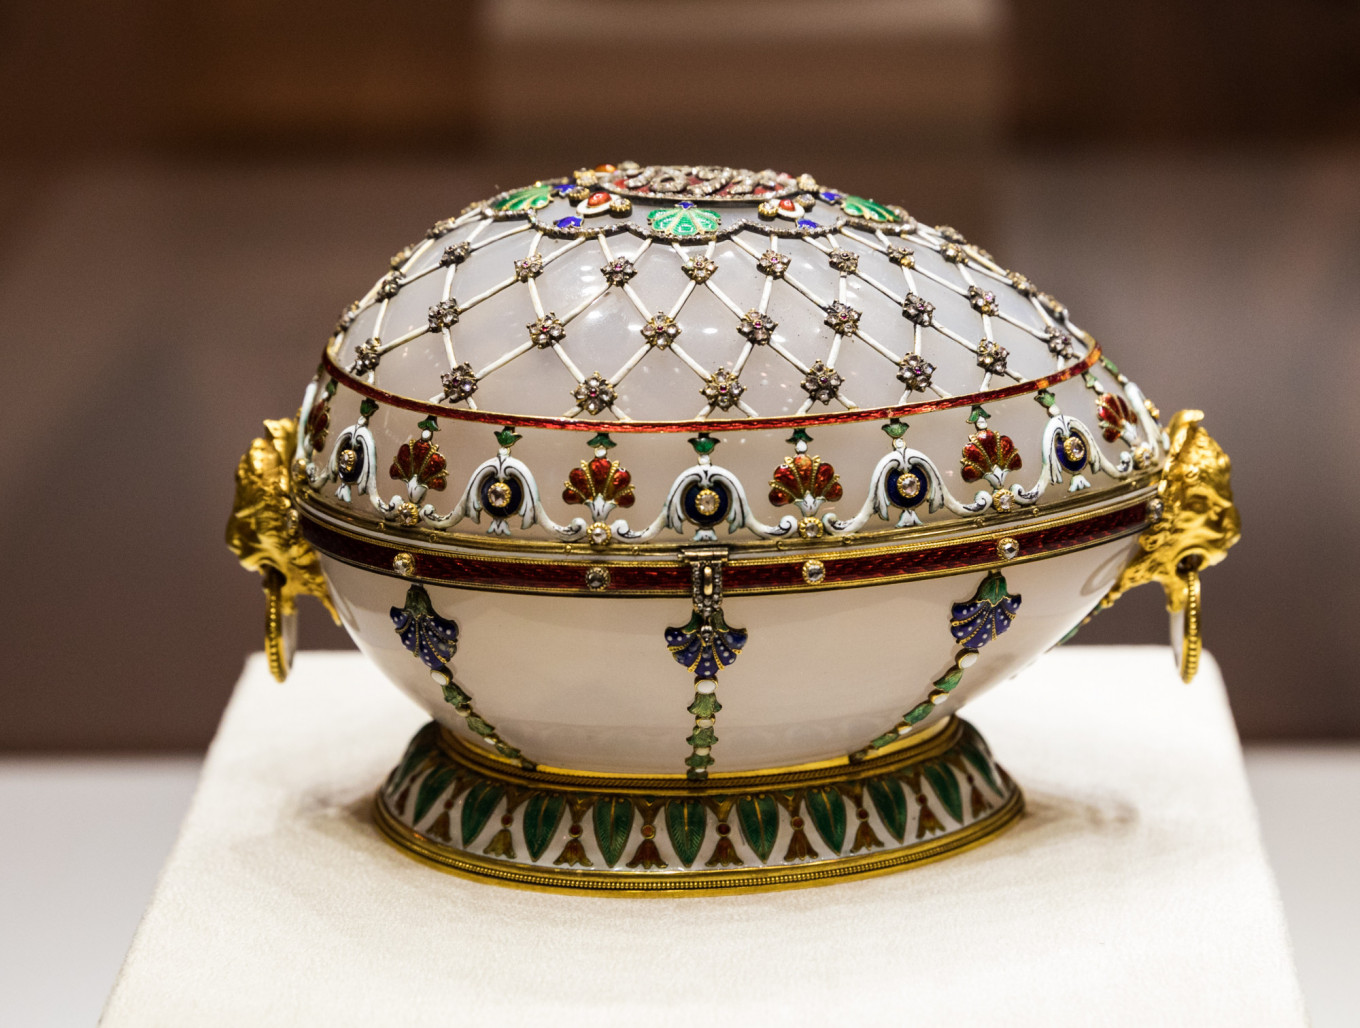 Fabergé and the Link of Times